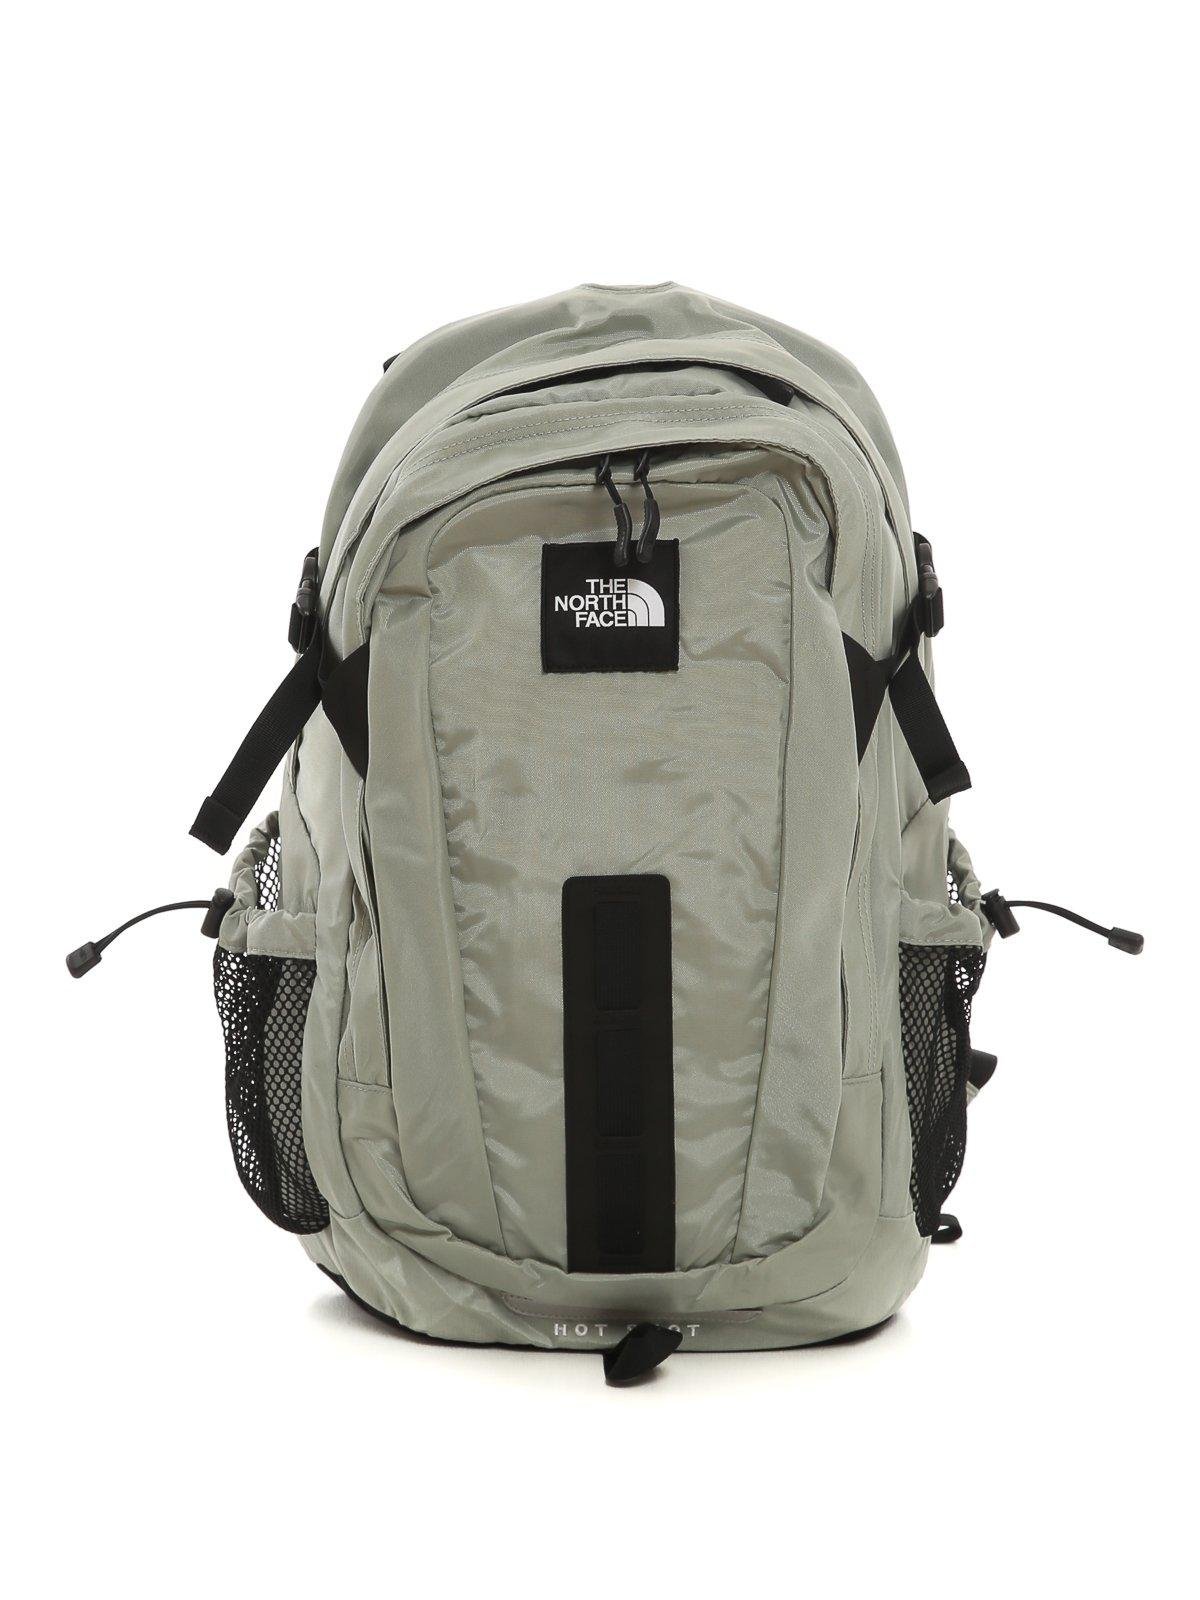 The North Face Hot Shot Backpack in Grey for Men | Lyst Australia